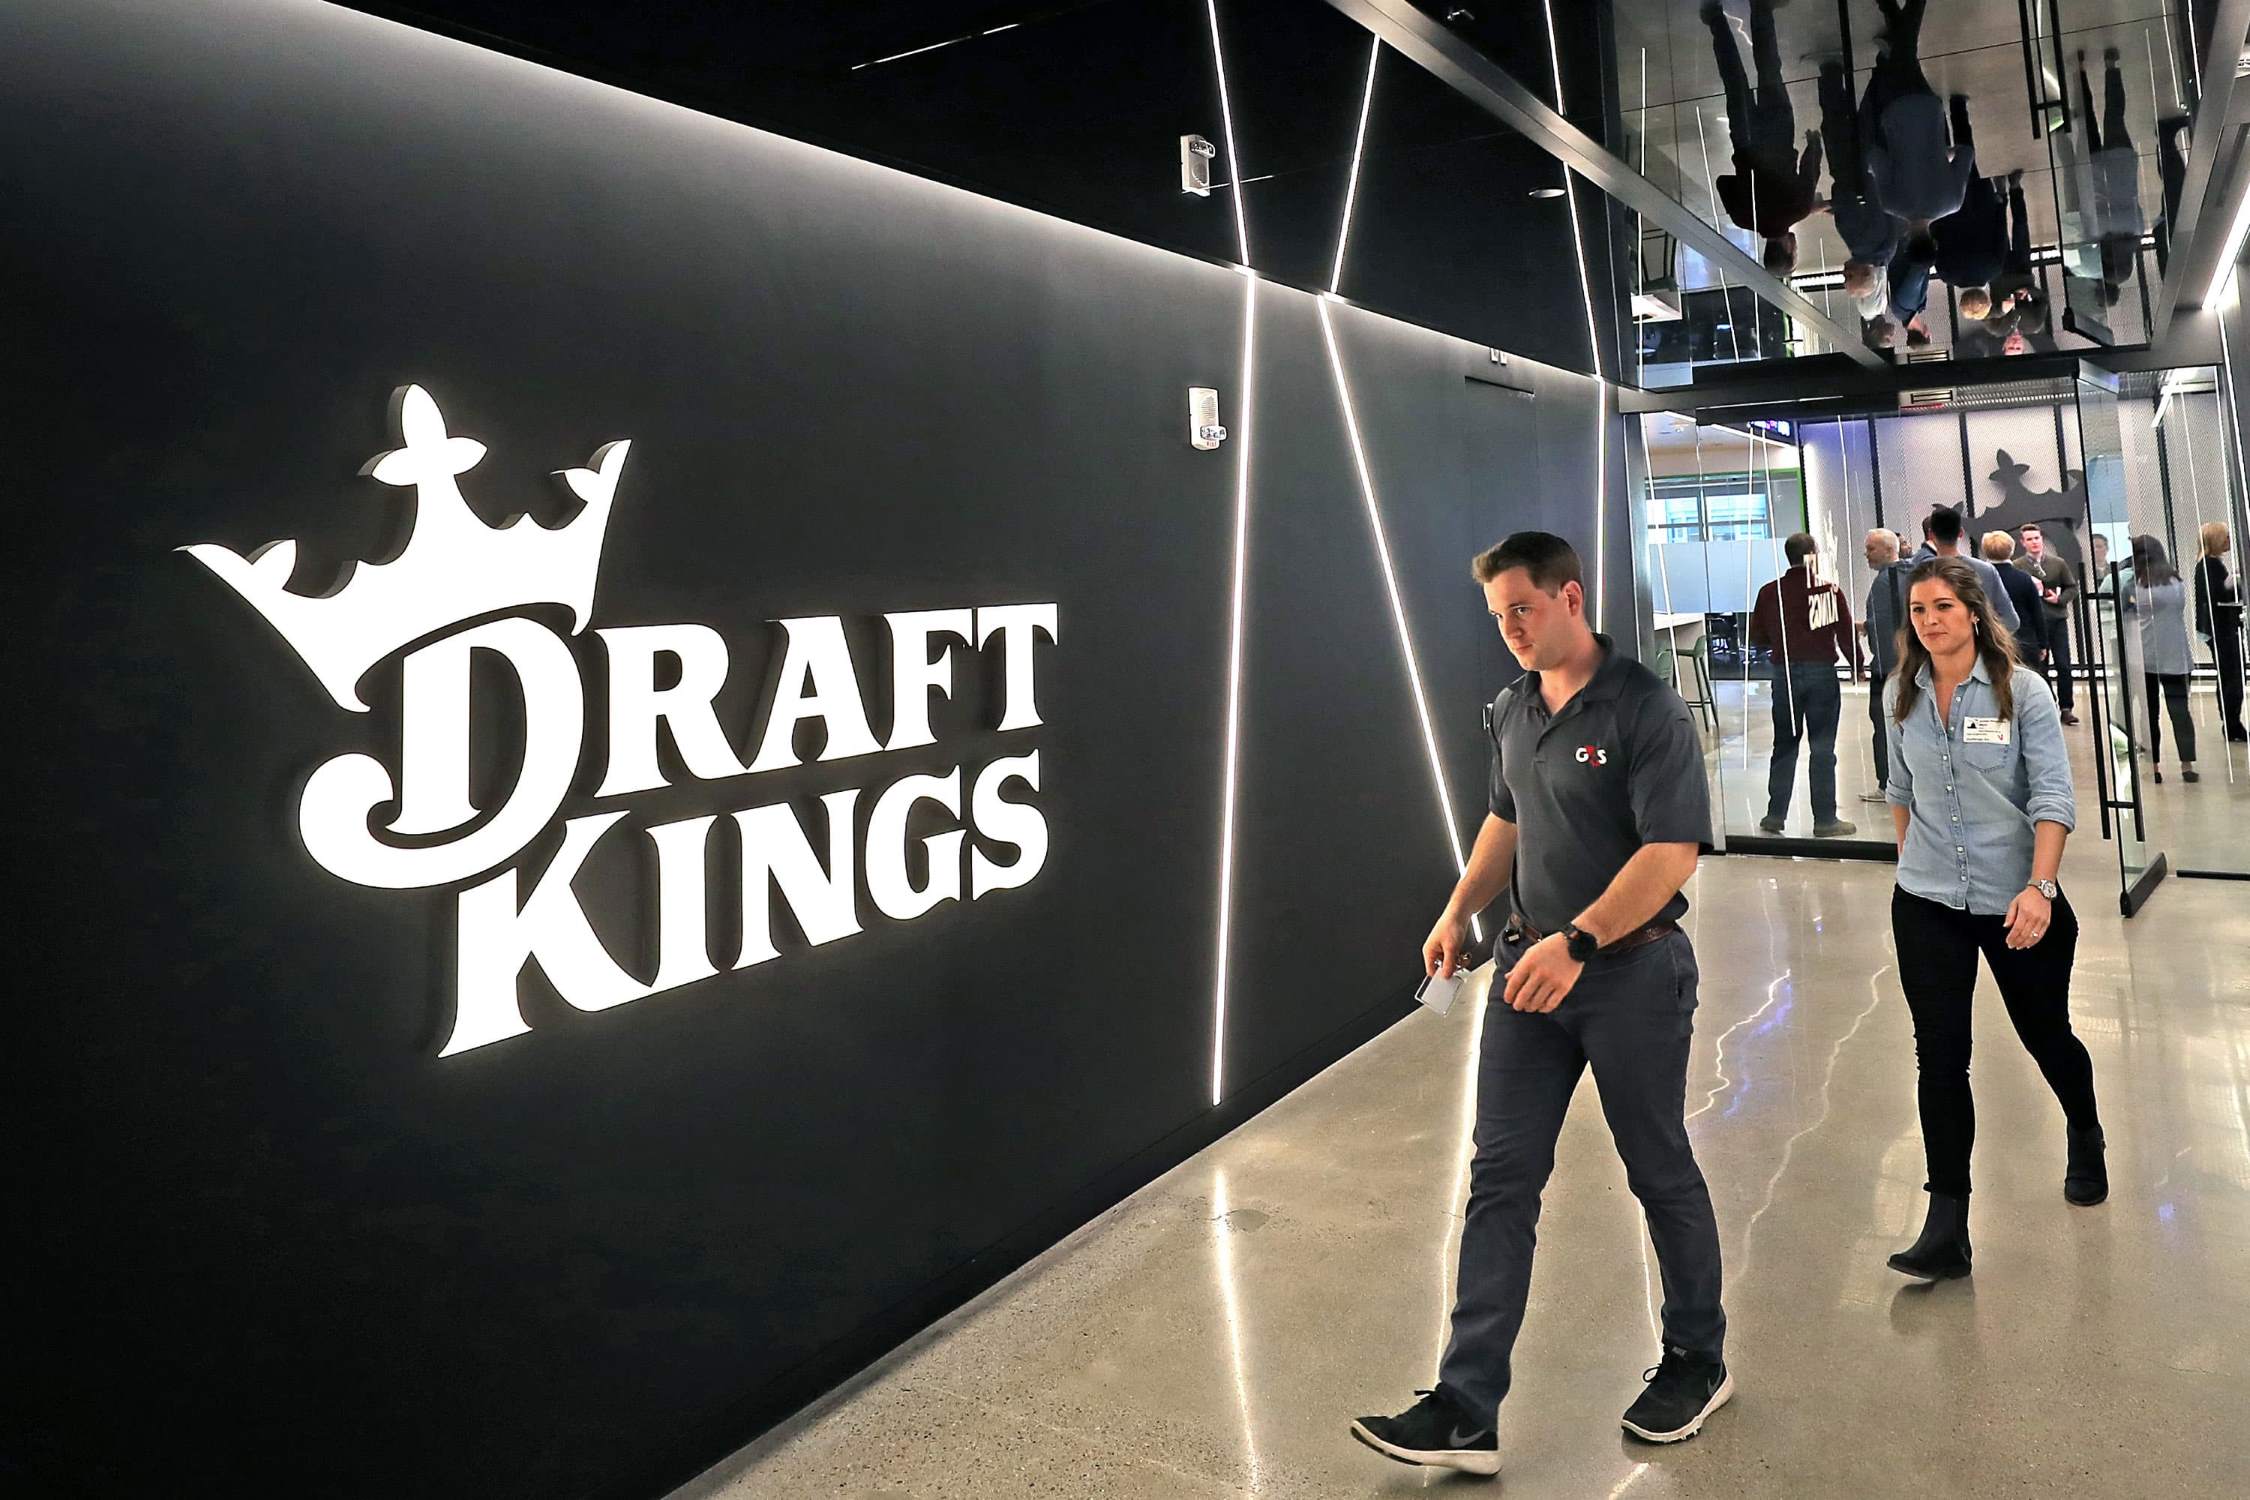 DraftKings Apologizes For Insensitive 9/11 Theme: “Never Forget”